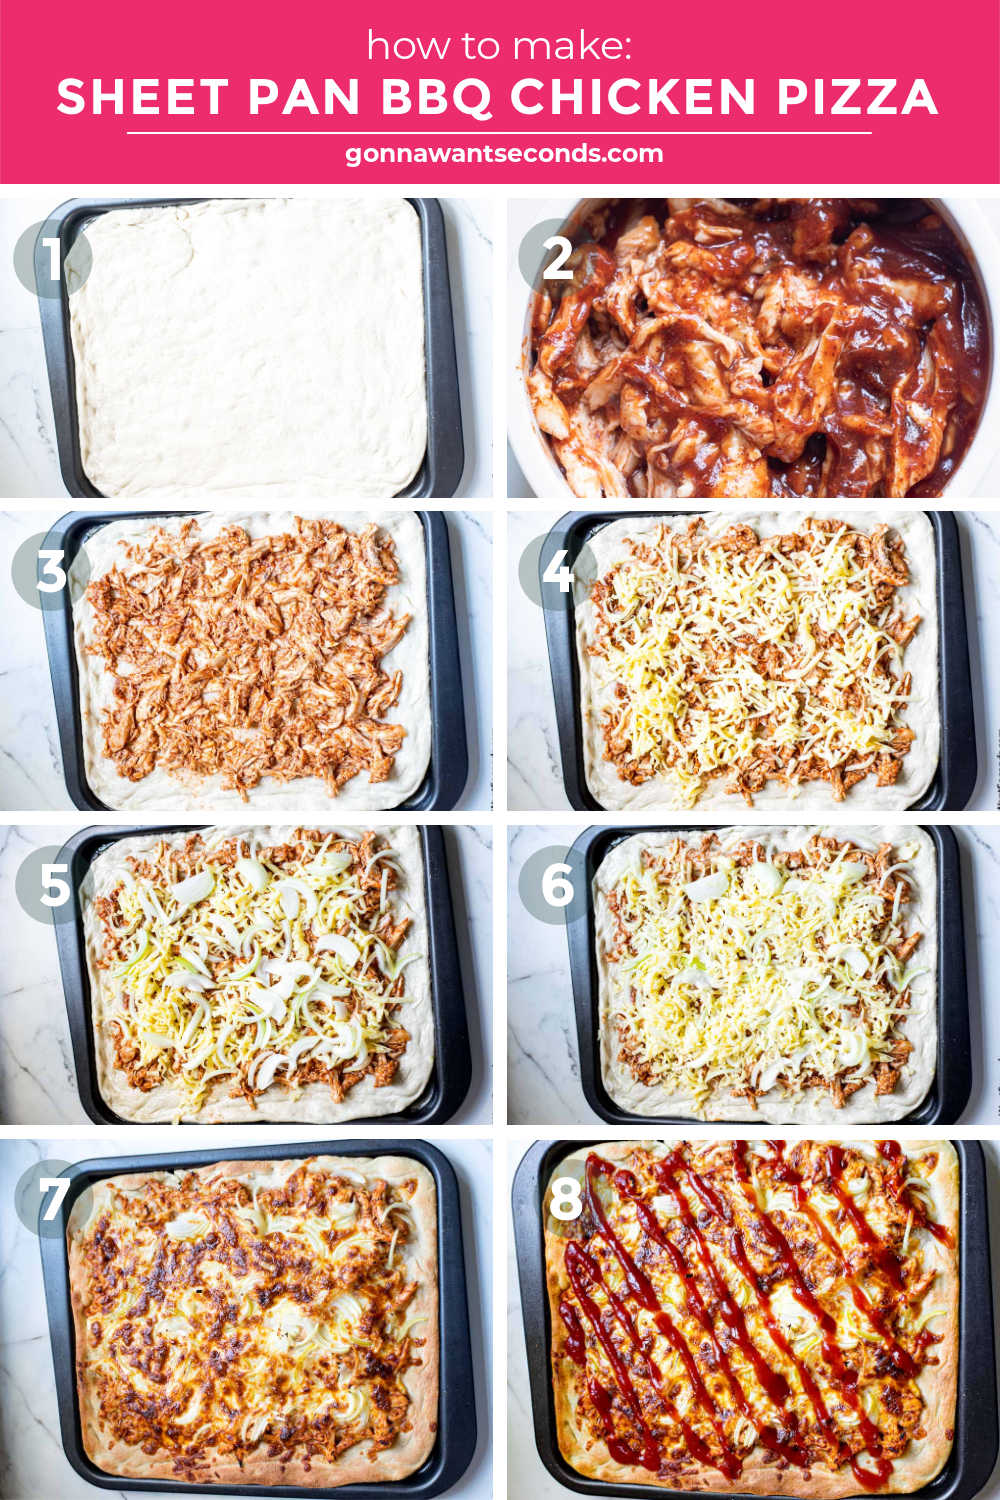 step by step how to make sheet pan bbq chicken pizza